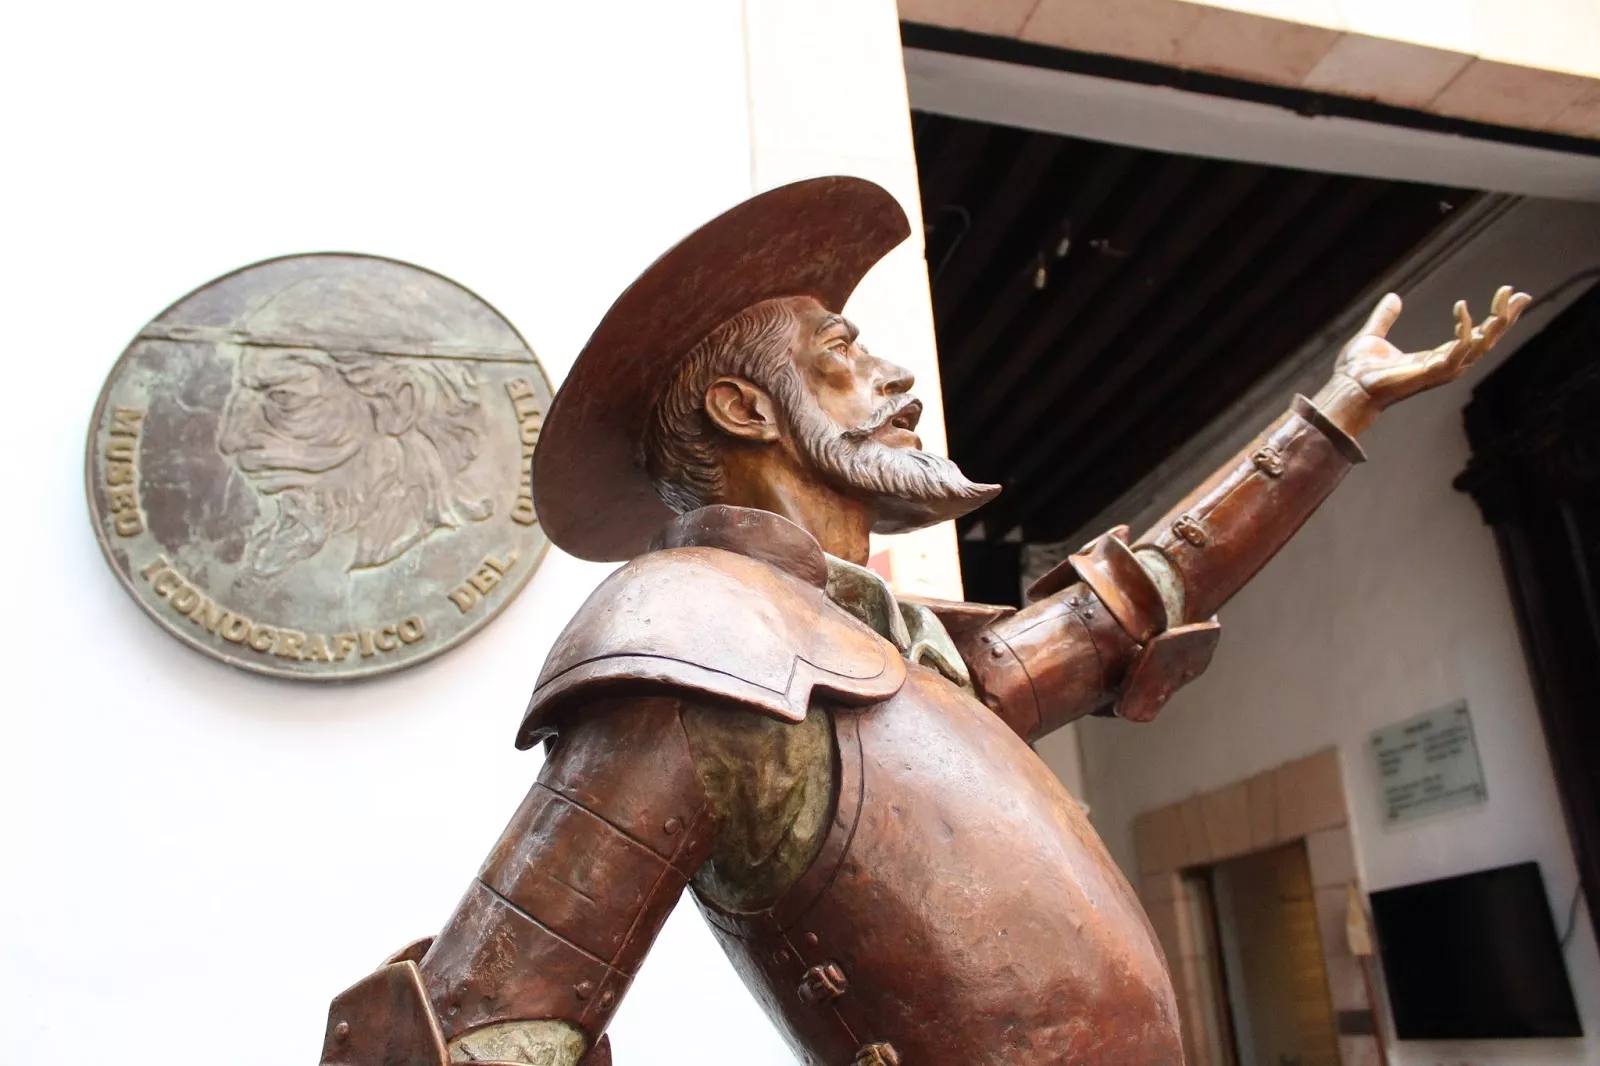 Don Quixote Iconographic Museum in Mexico, North America | Museums - Rated 3.8